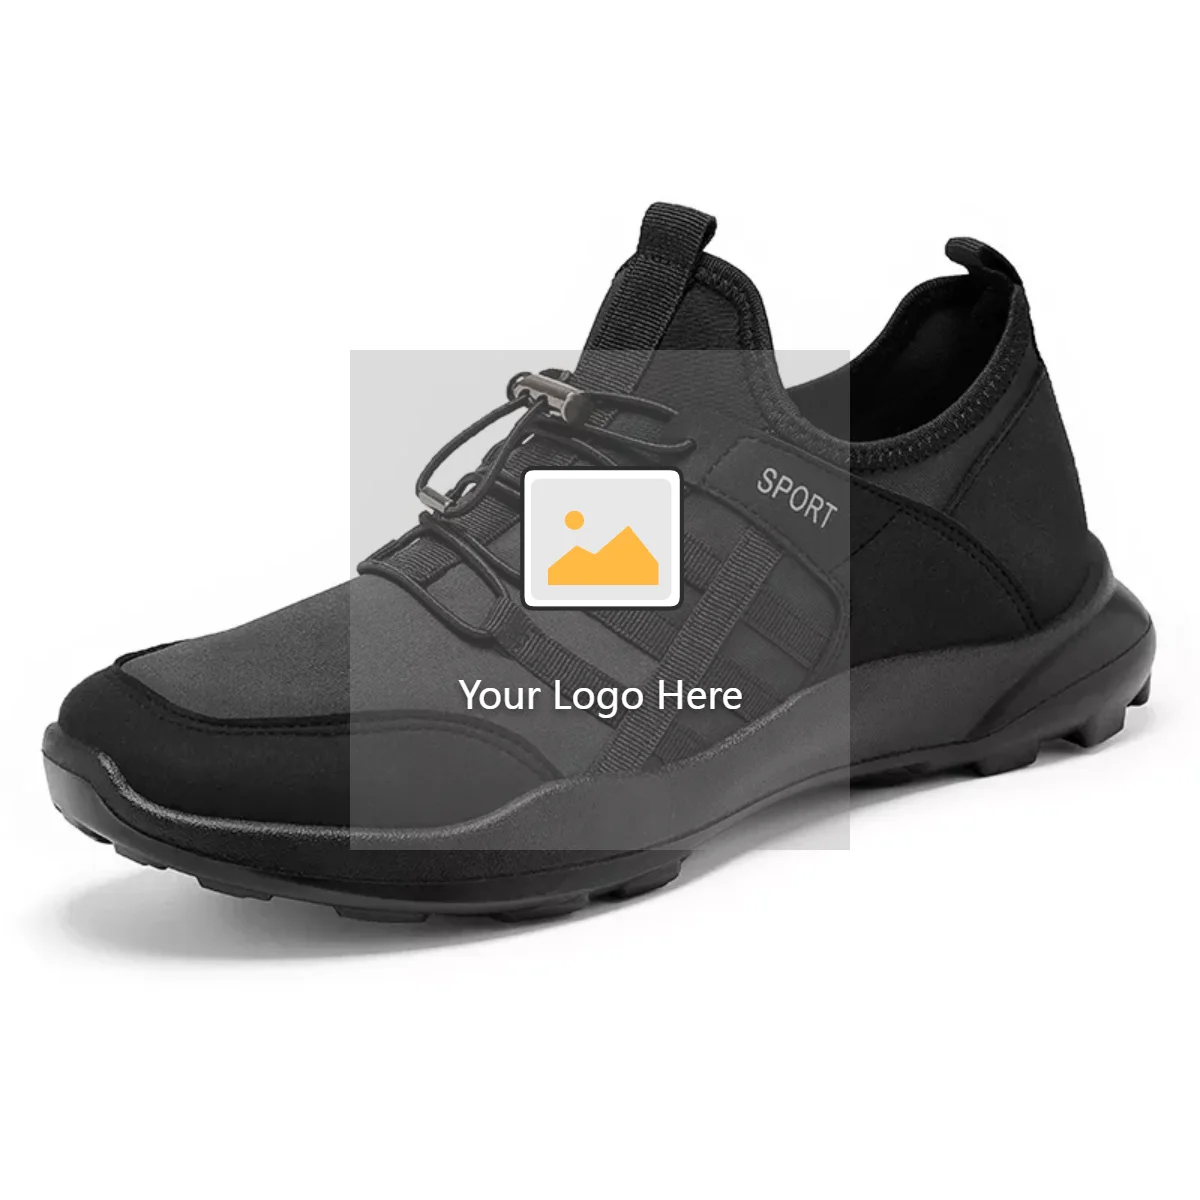 Auto stormloop Cyberruimte Hot Sale 100% Luxury Sneakers For Men Fast Delivery Large Stock Casual  Sneakers For Men Shoes - Buy Luxury Sneakers For Men,Sneakers For Men  Shoes,Casual Sneakers For Men Product on Alibaba.com